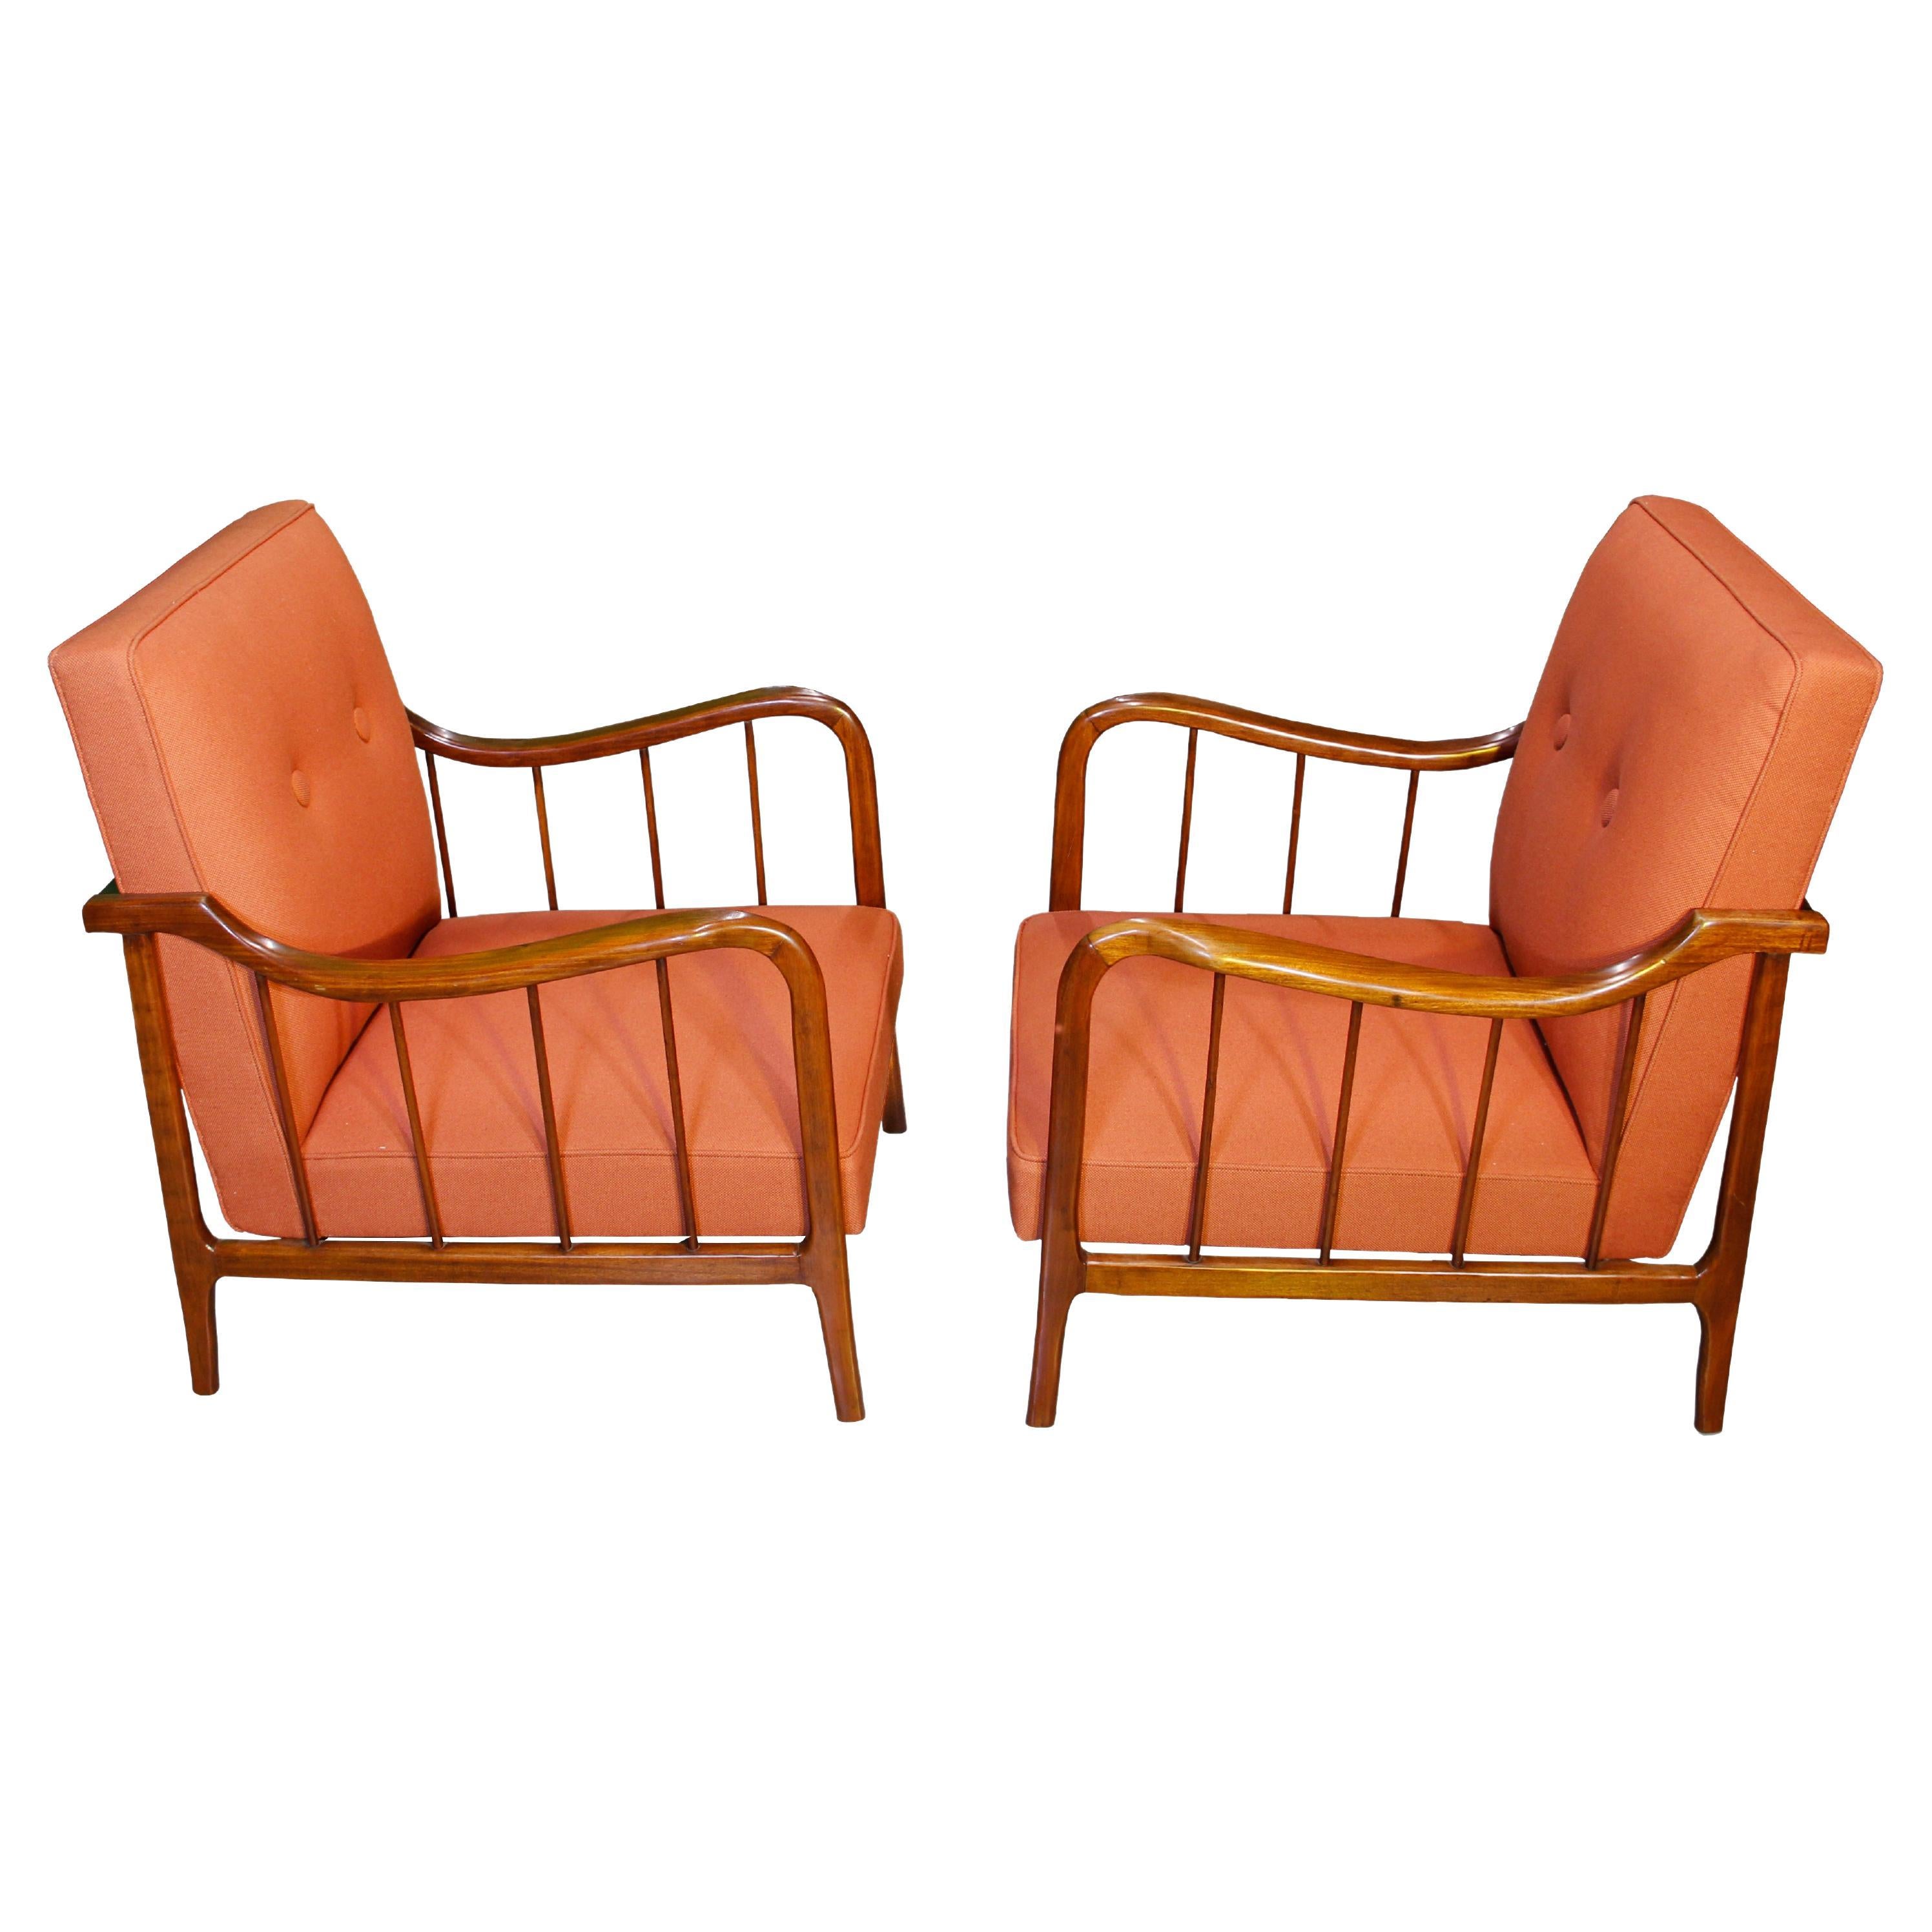 Pair of Armchairs by Rino Levi, Brazil, 1950s